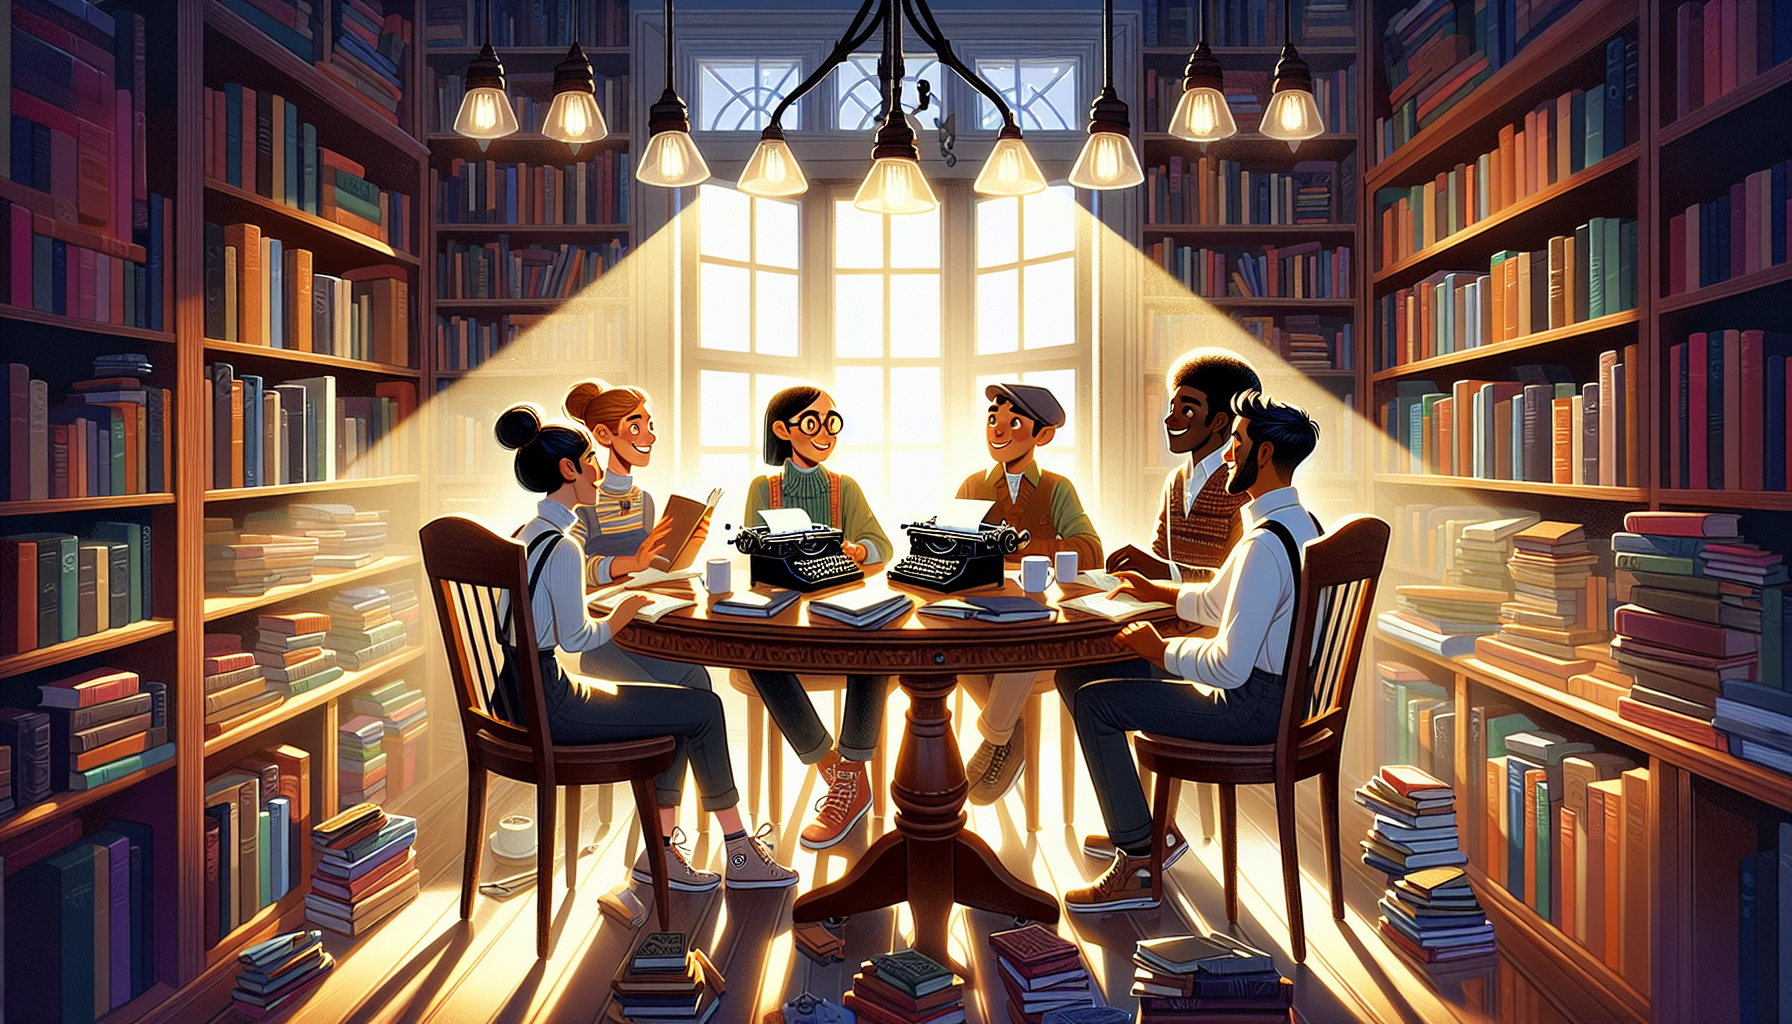 A cozy, warmly lit study filled with books, where a diverse group of four fictional authors, depicted as animated characters, are gathered around an old wooden round table, enthusiastically discussing